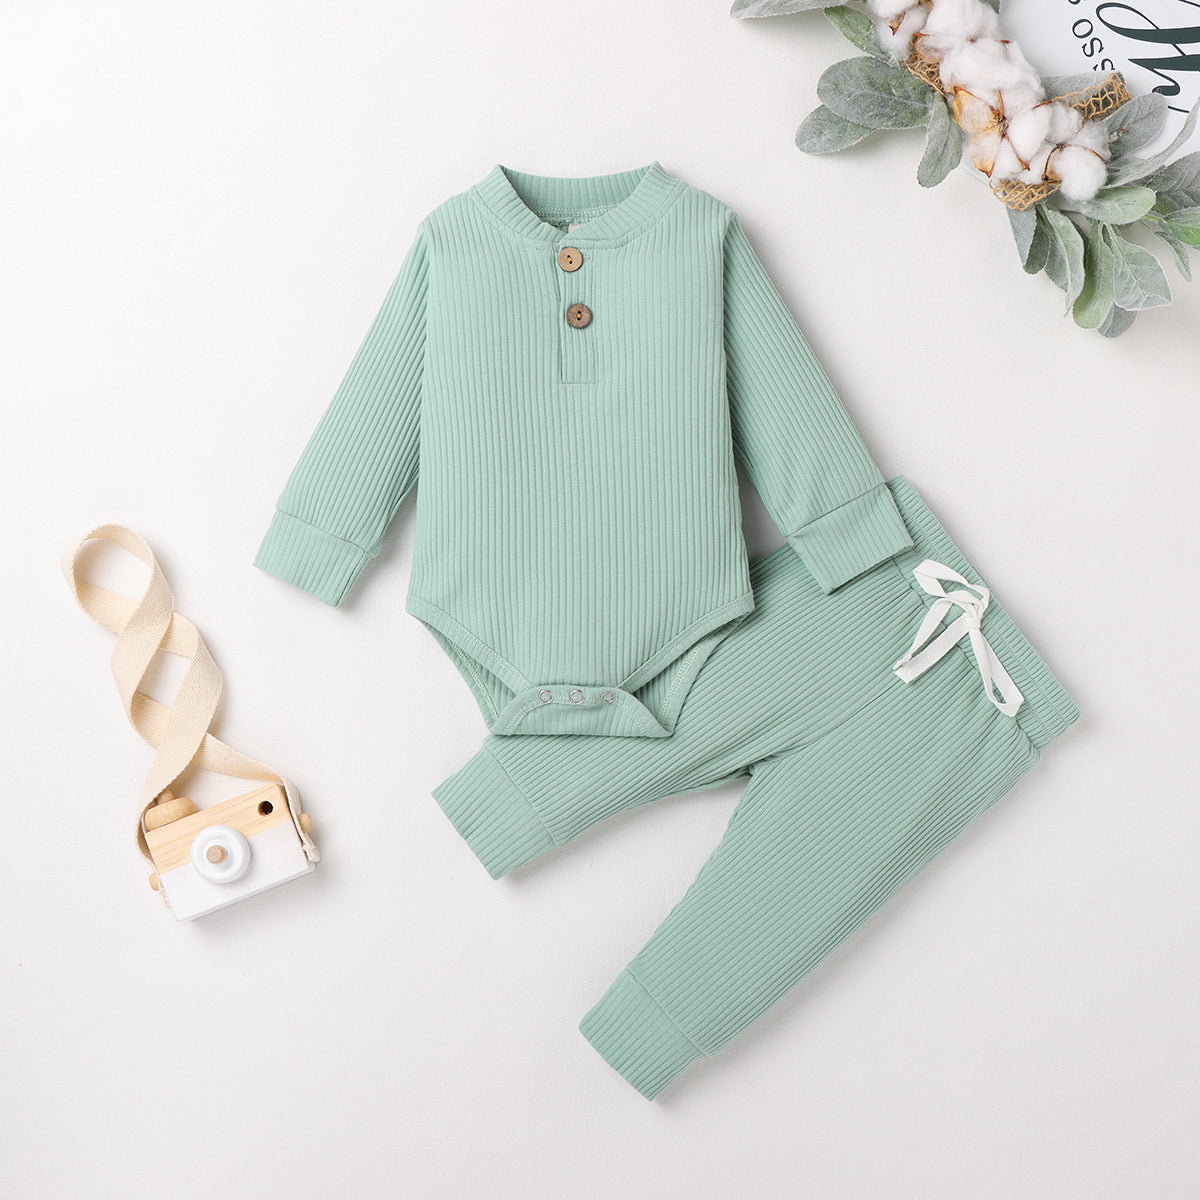 Baby Two-Piece Clothing Set Long Sleeve